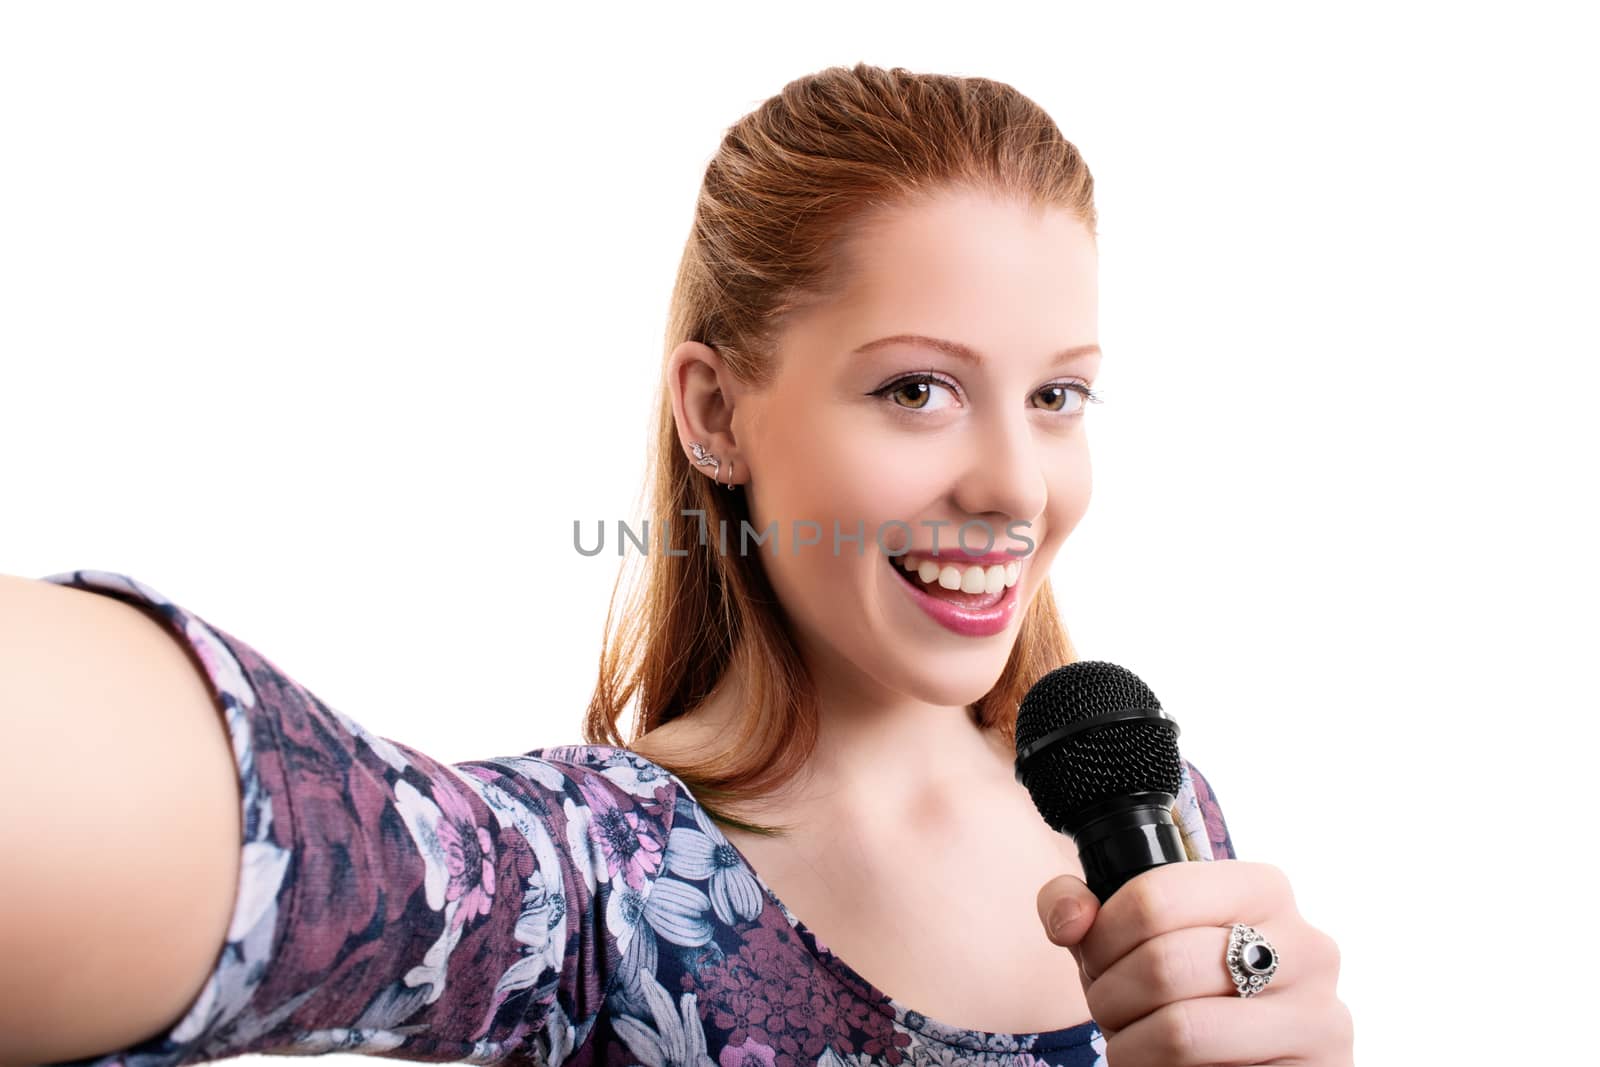 Beautiful young girl holding a microphone and taking a selfie, isolated on white background. Lifestyle, happiness, and social concept. Fashionable girl with a microphone singing and taking a selfie.